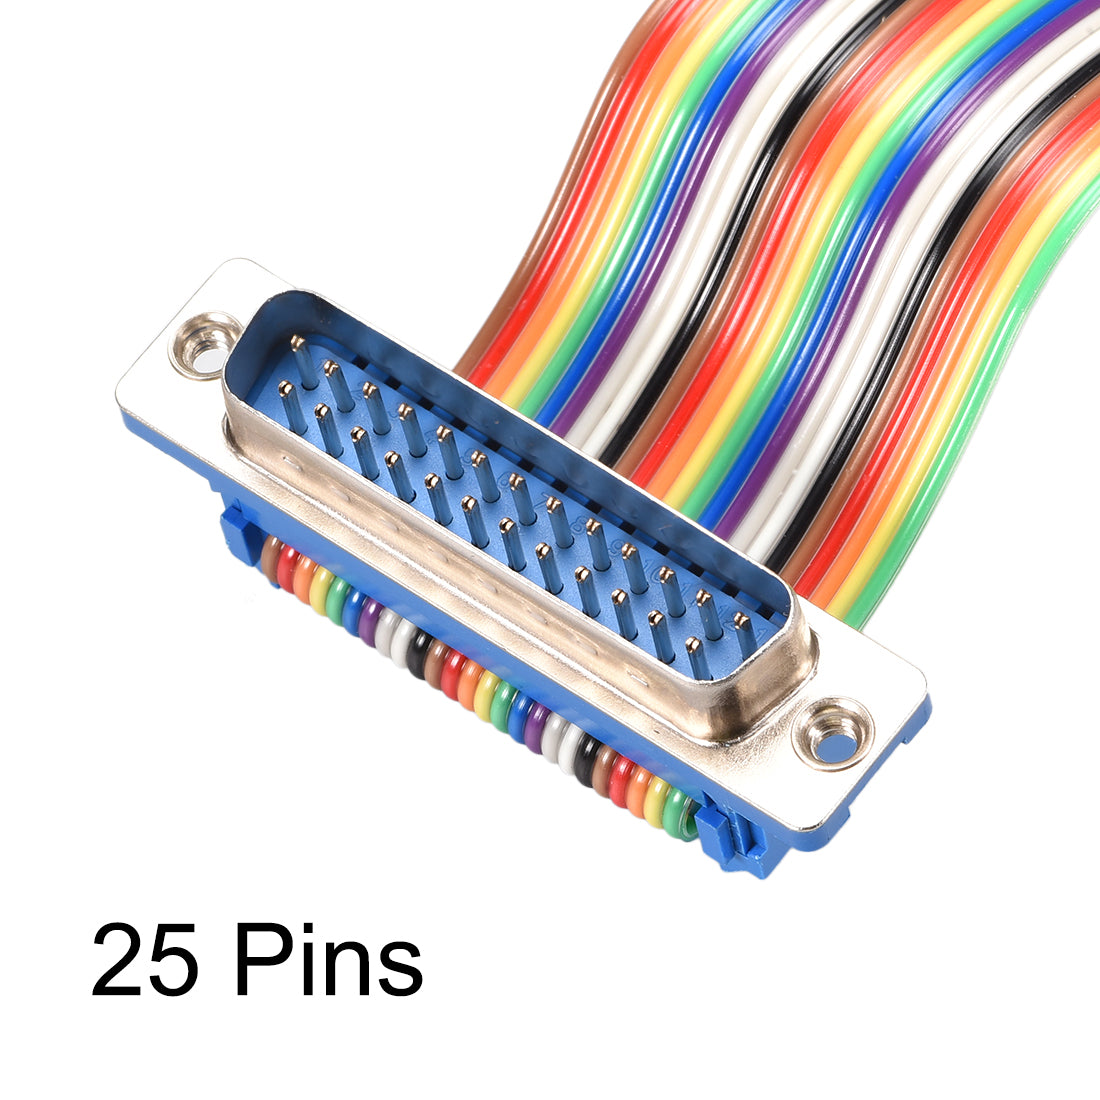 uxcell Uxcell IDC Rainbow Wire Flat Ribbon Cable DB25 Male to DB25 Male Connector 2.54mm Pitch 19.7inch Length